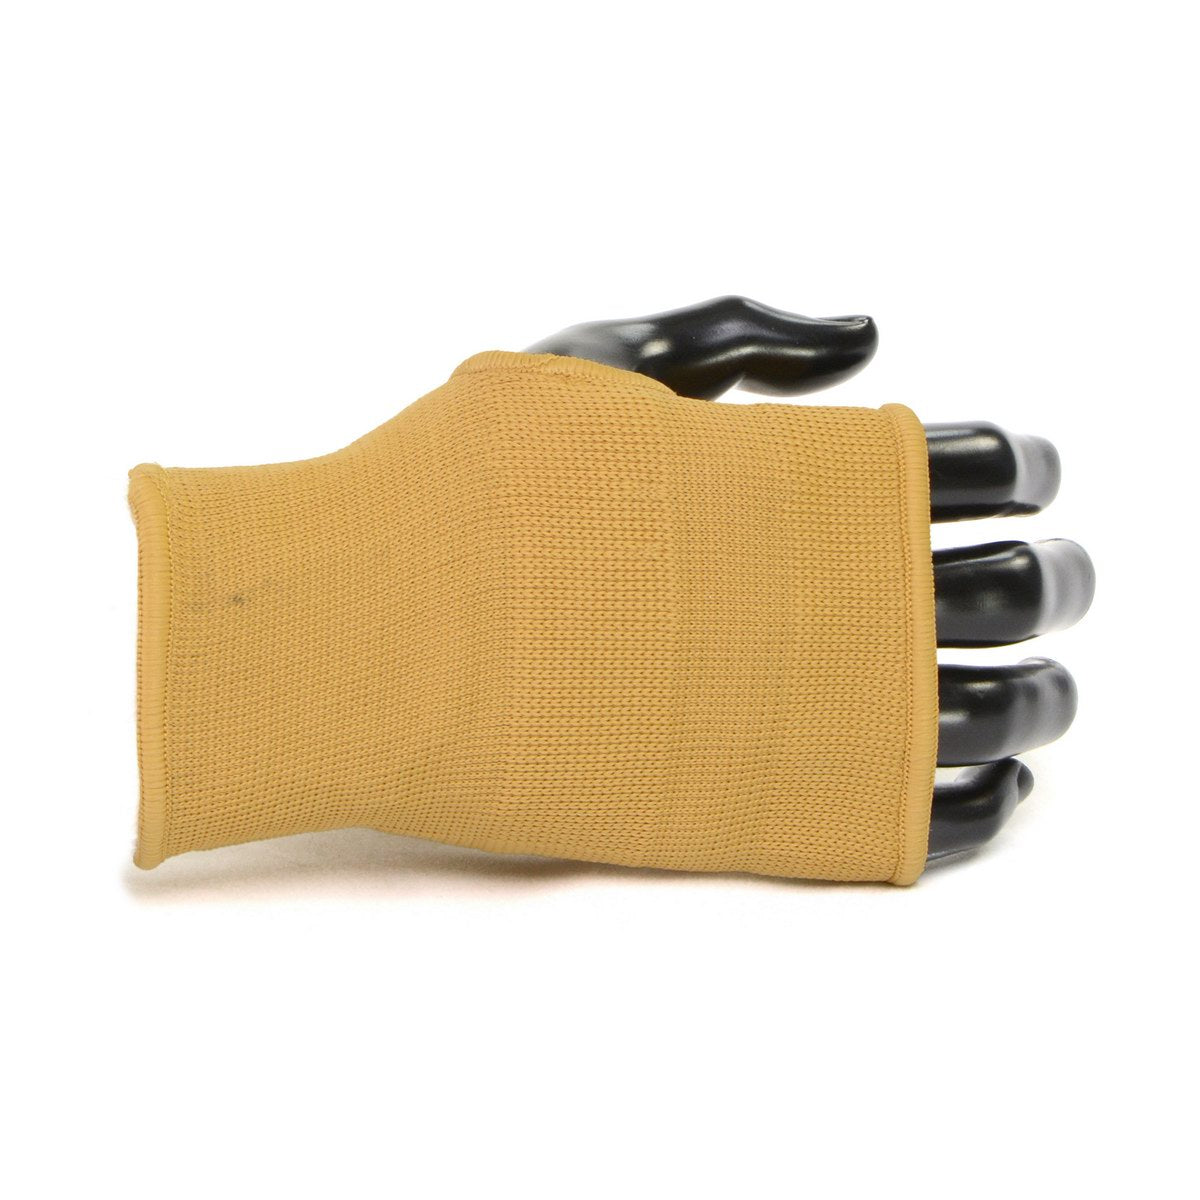 X-Fitness XF3002 Wrist Support Sleeves-BEIGE